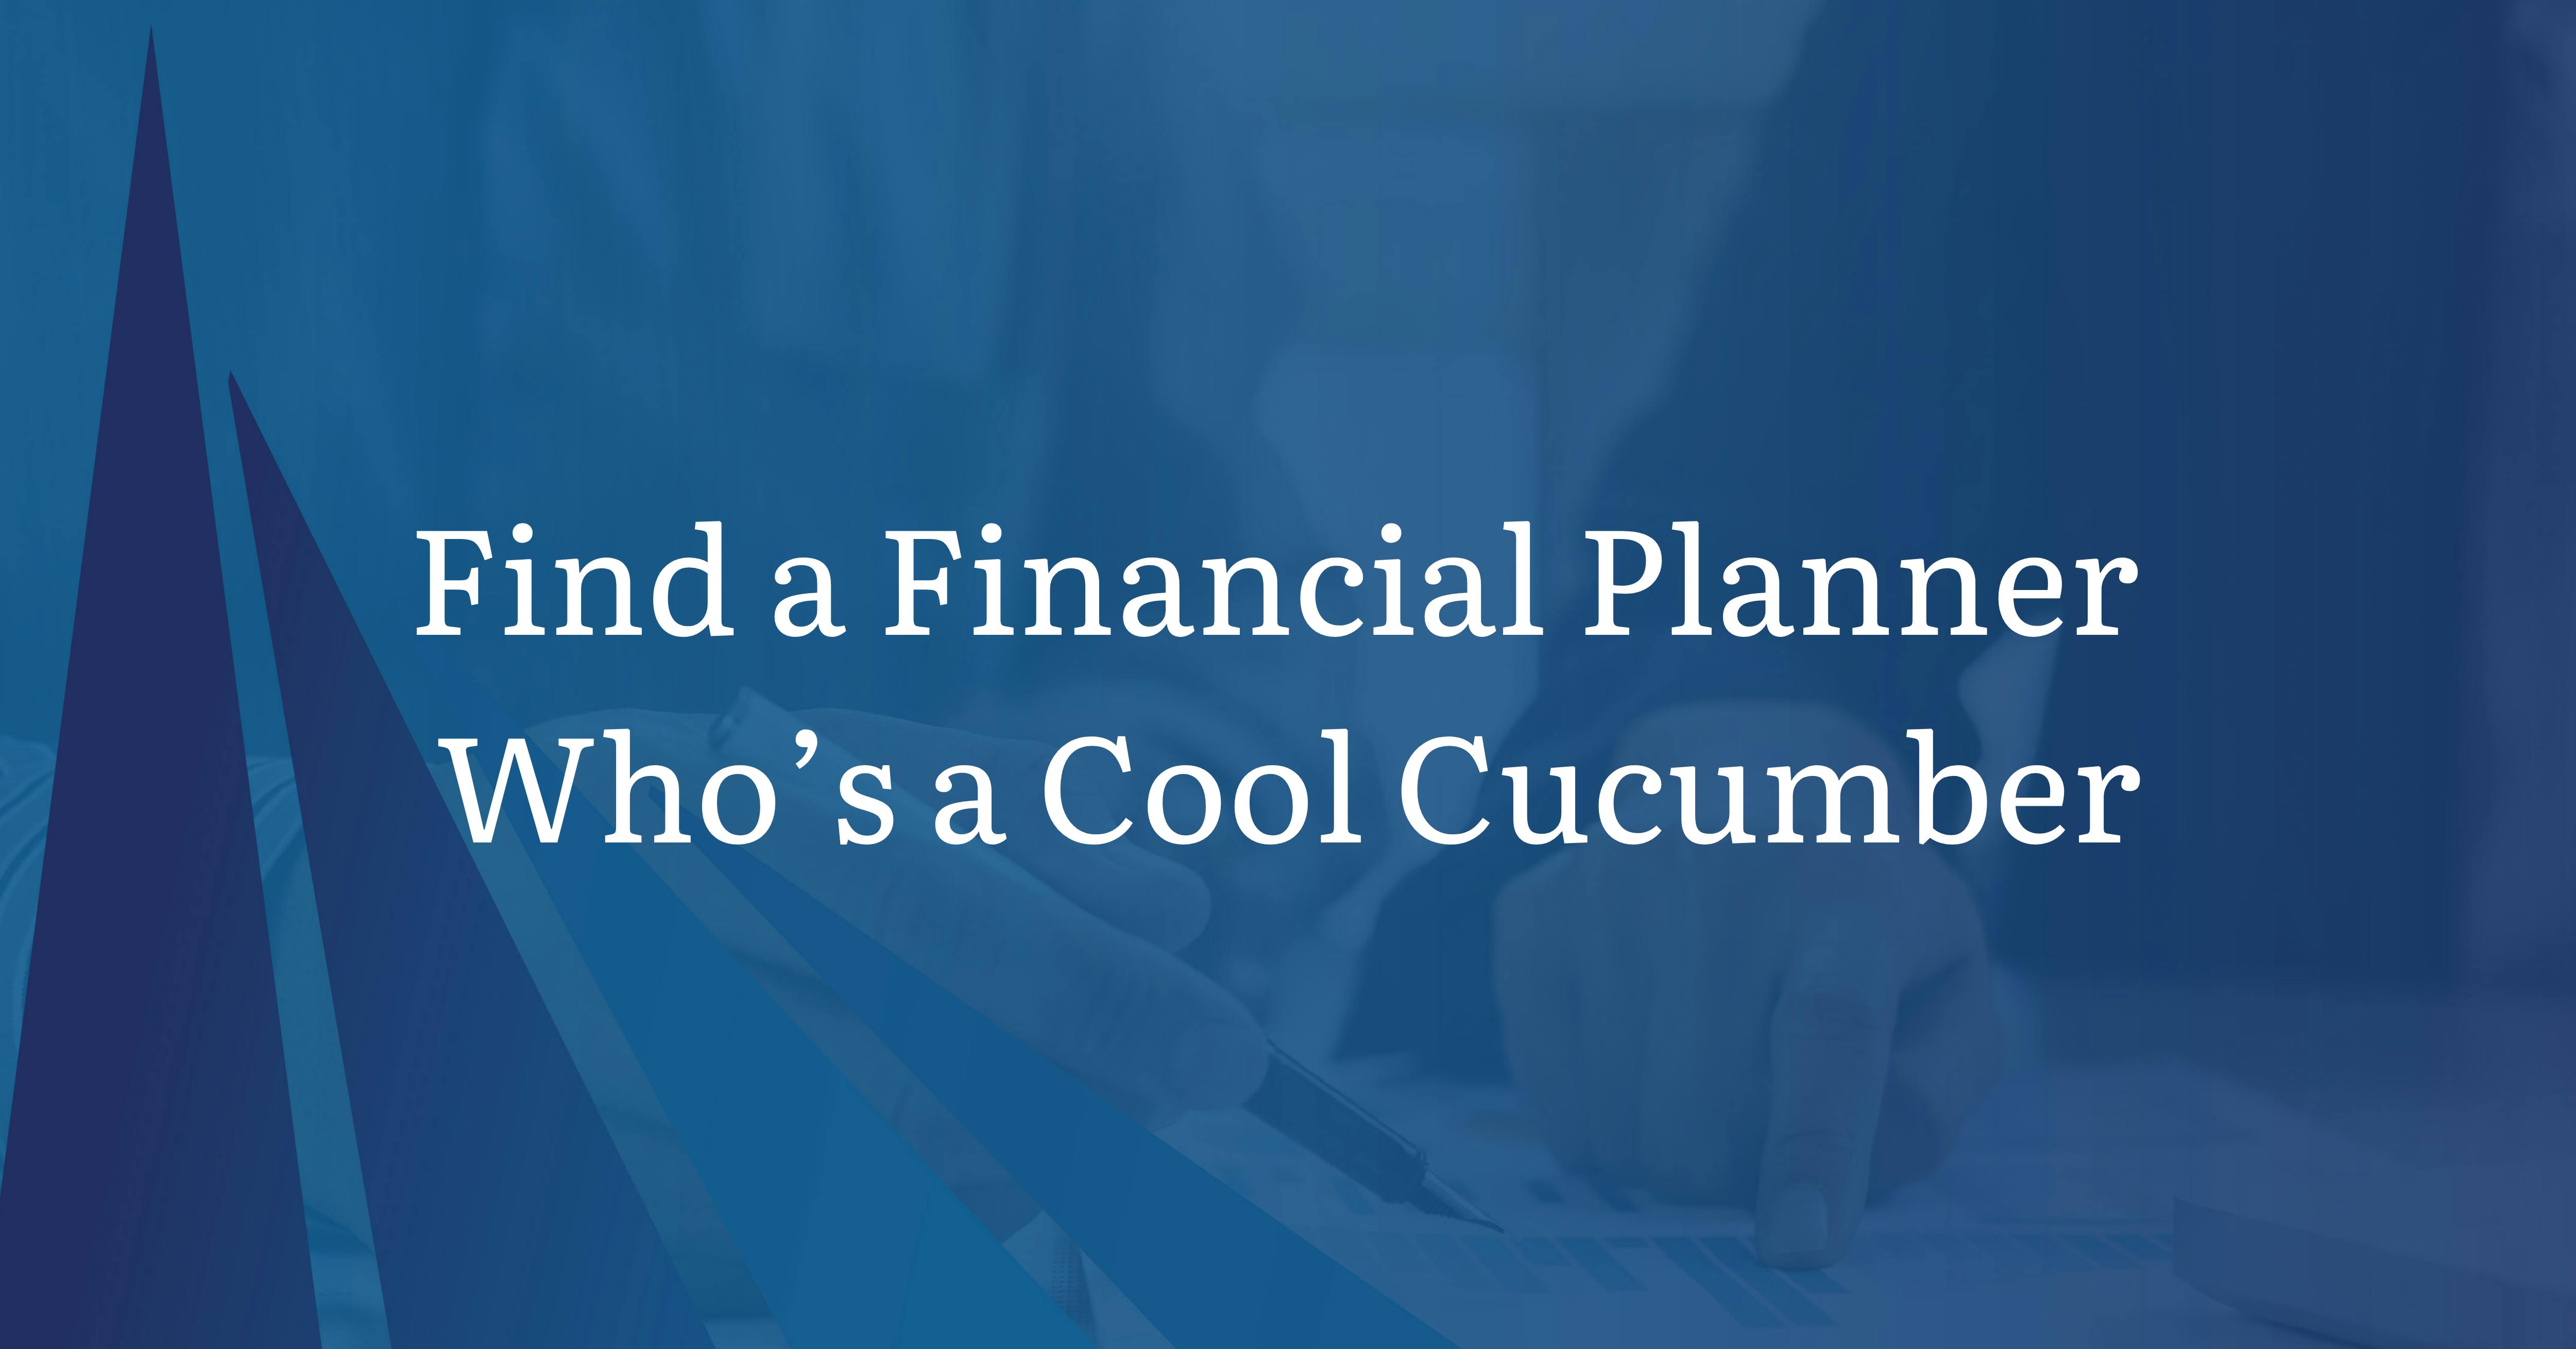 Find a Financial Planner Who’s a Cool Cucumber